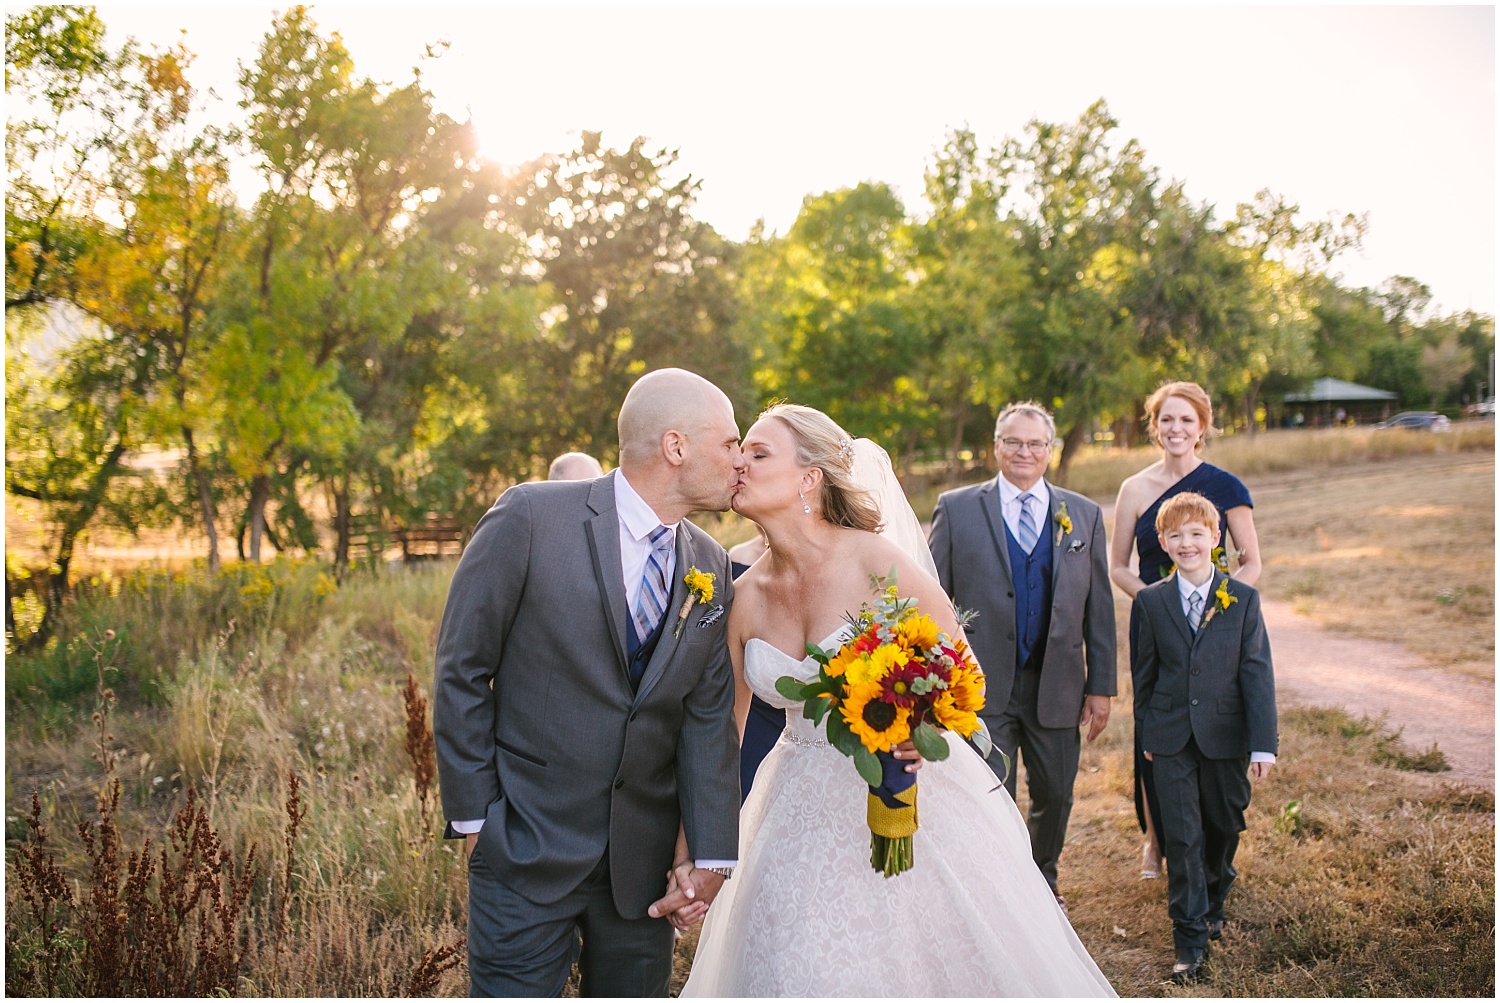 Wedding party pictures at sunset in Bear Creek Park in Colorado Springs